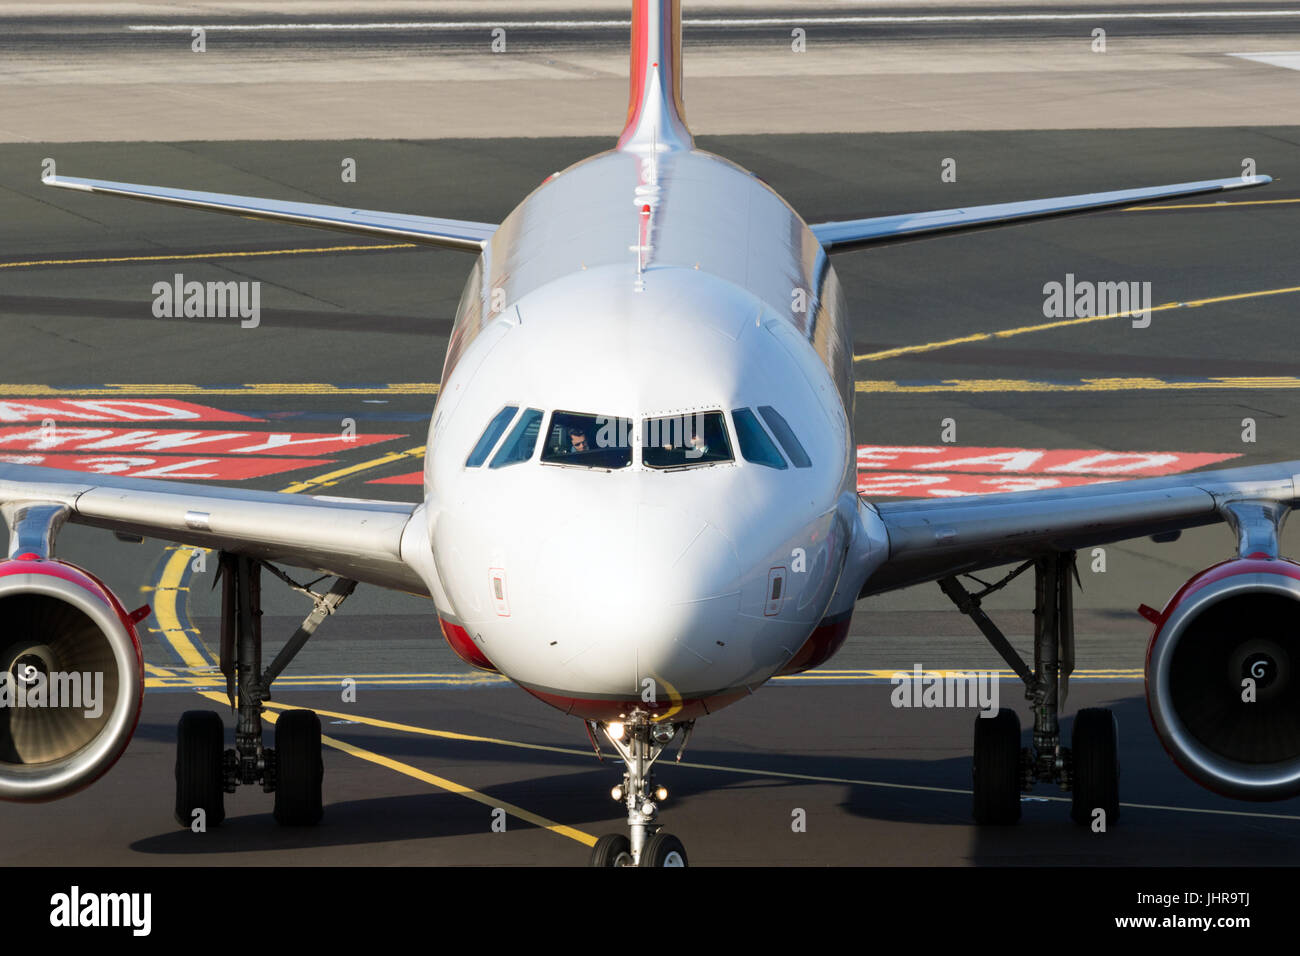 DUSSELDORF, GERMANY - DEC 16, 2016: Airbus A319 plane from Air Berlin airline taxiing to the gate at Dusseldorf airport. Stock Photo